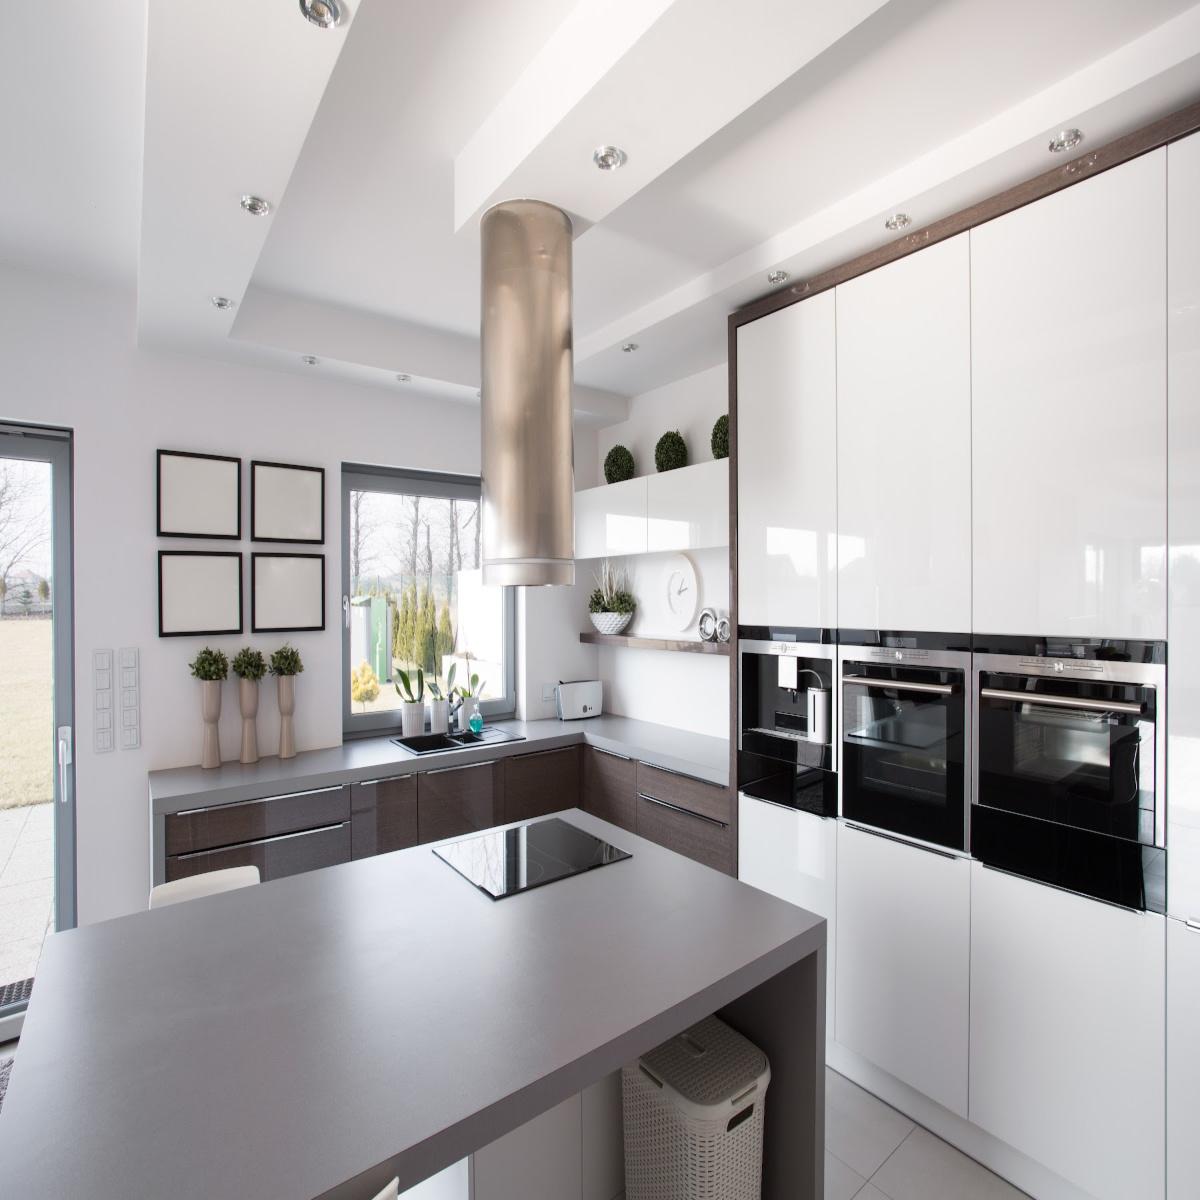 6 Top Kitchen Must Haves For Your Remodel